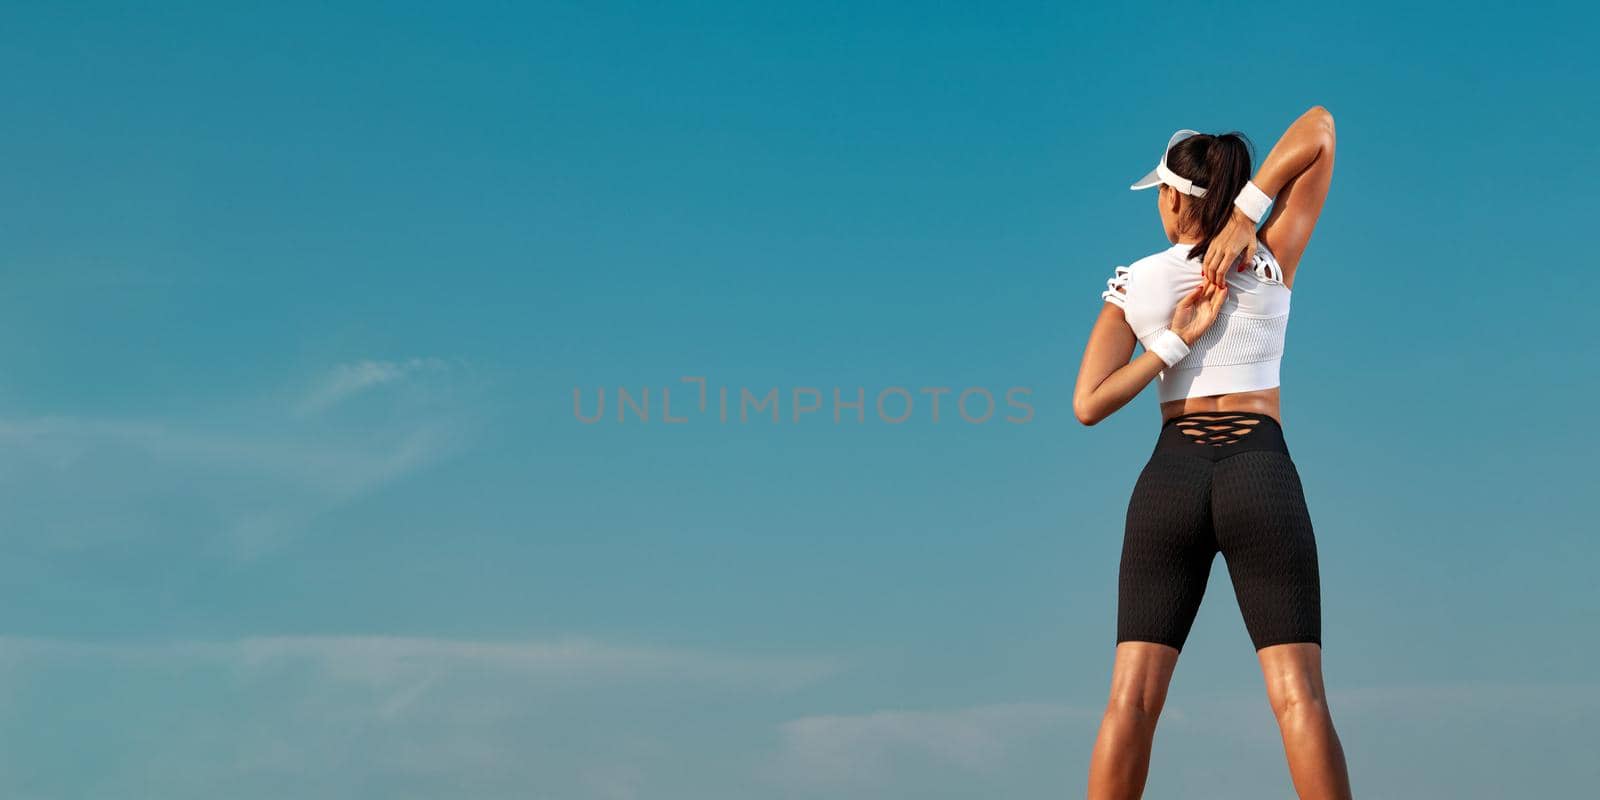 Banner photo for atlethics website. Athlete woman on template for site header. by MikeOrlov